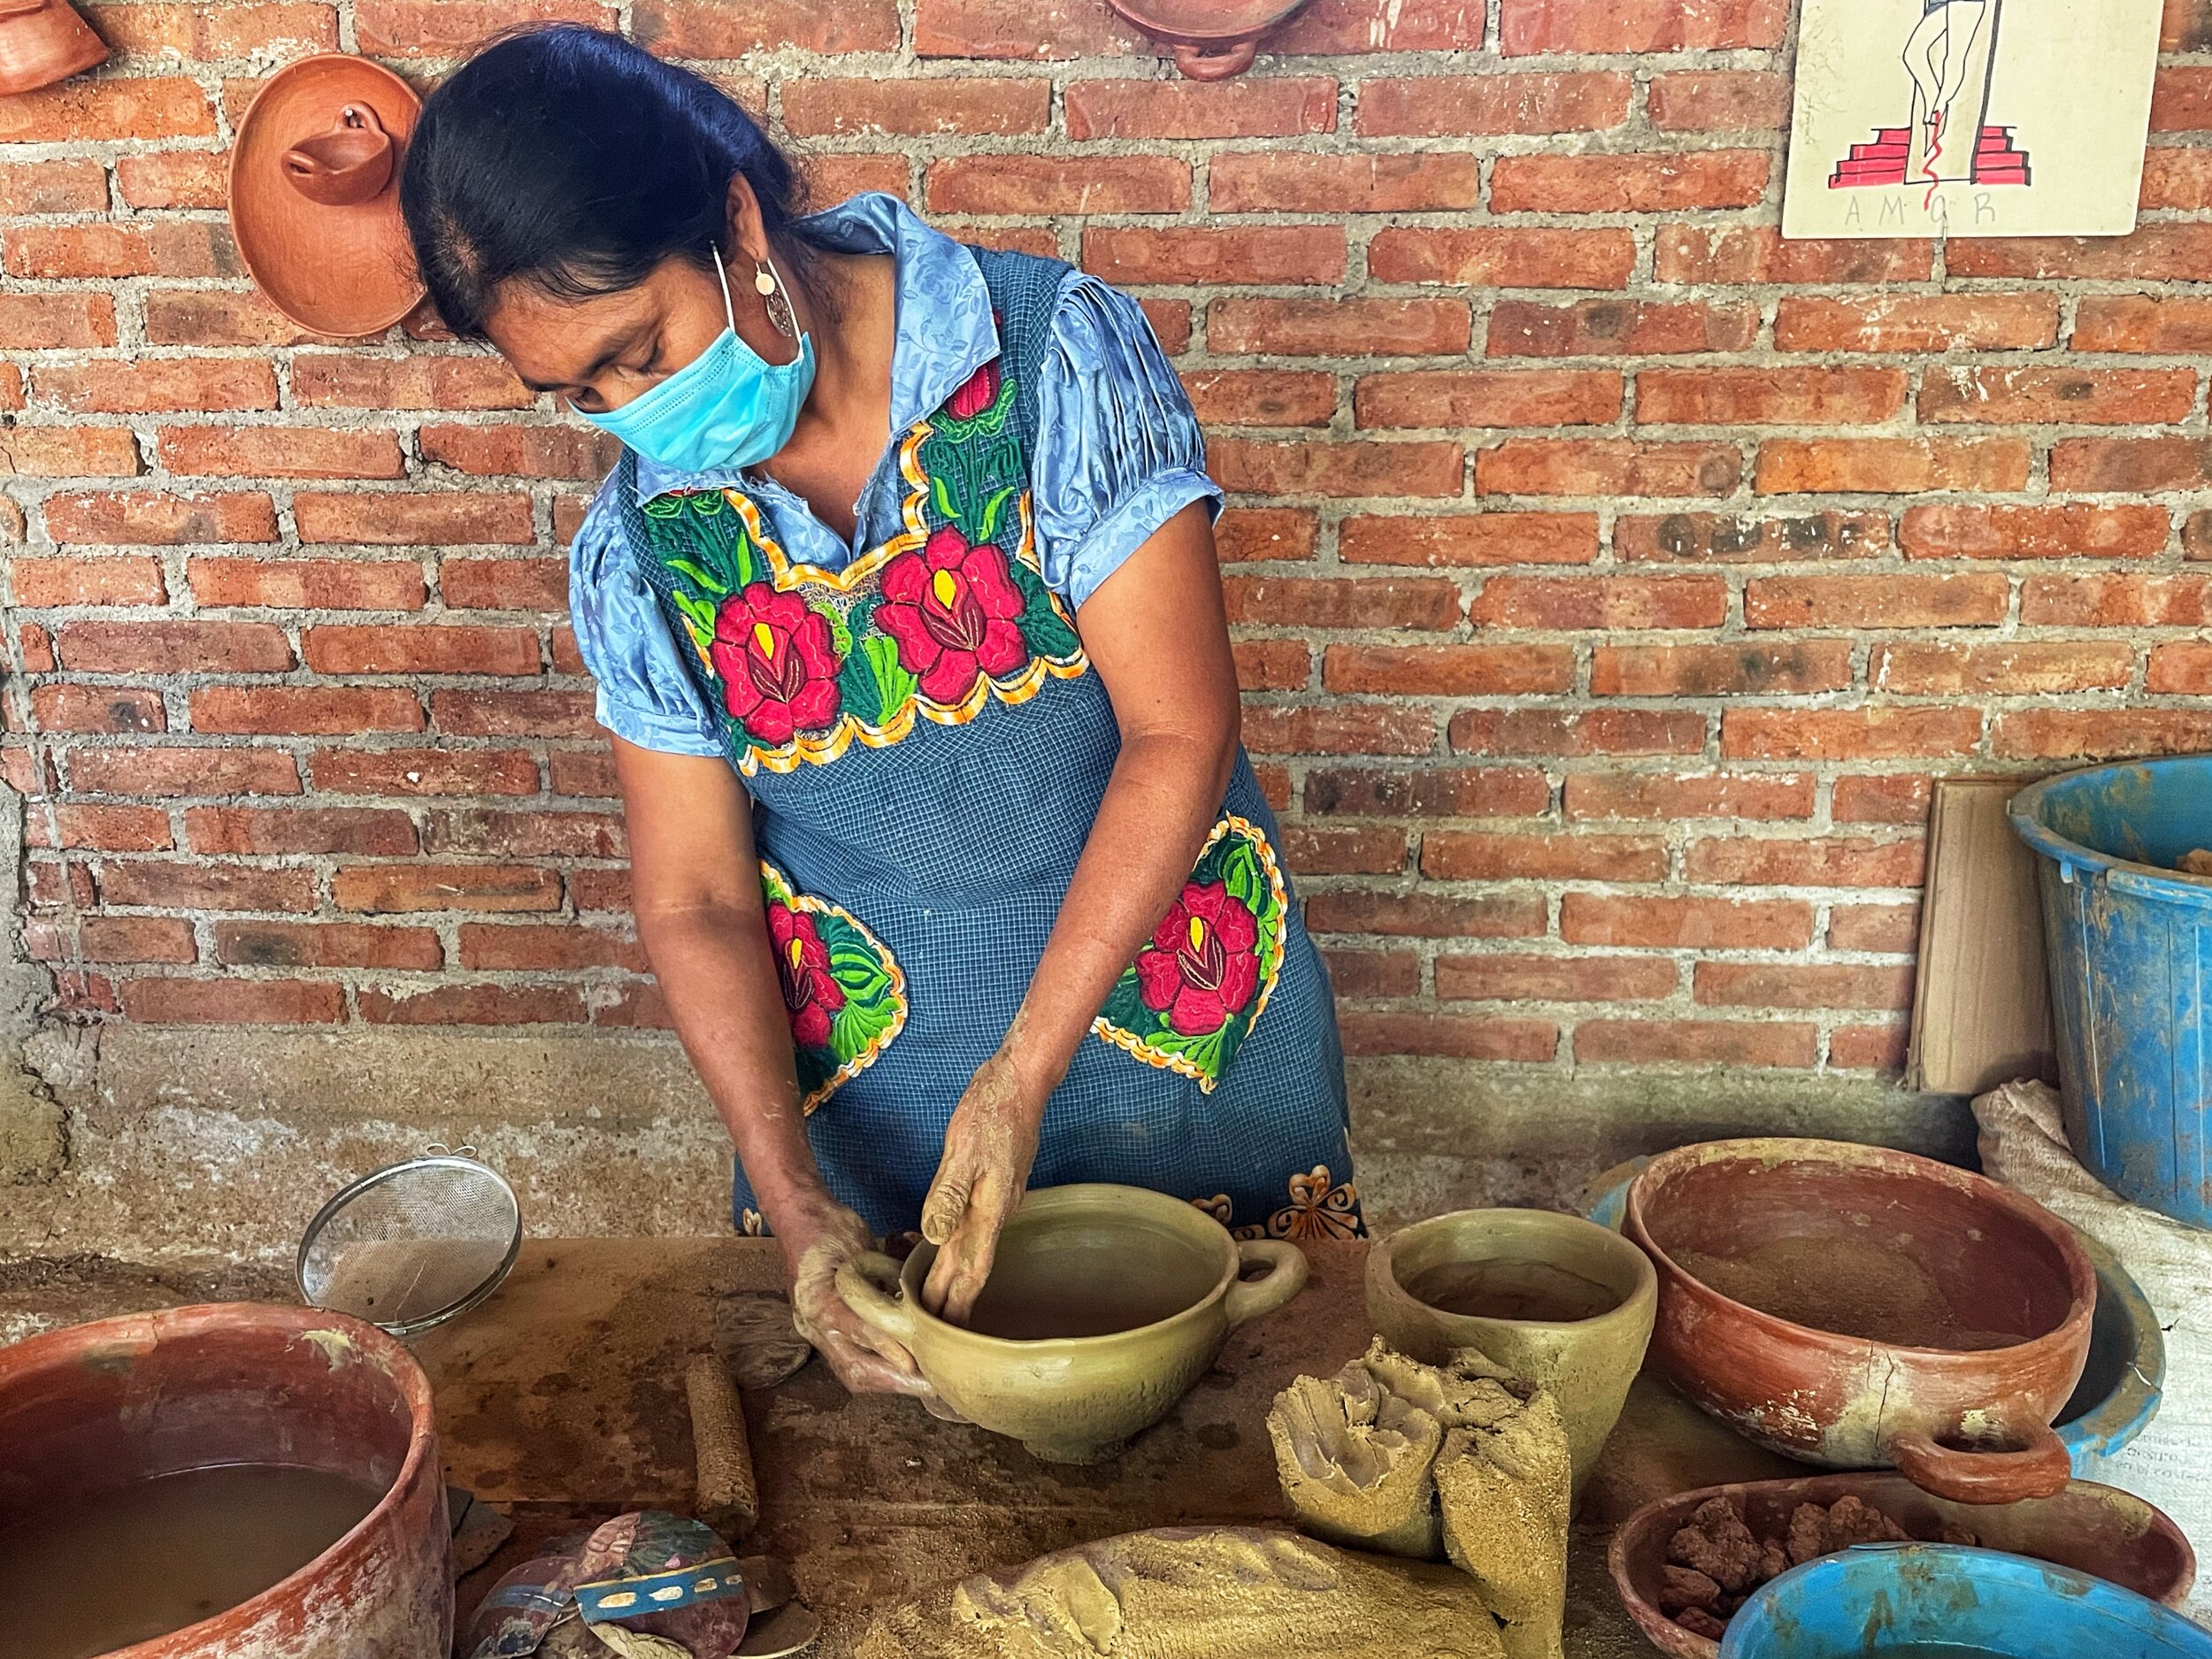 Meet the Red Clay Ceramic-producing Maestras of San Marcos